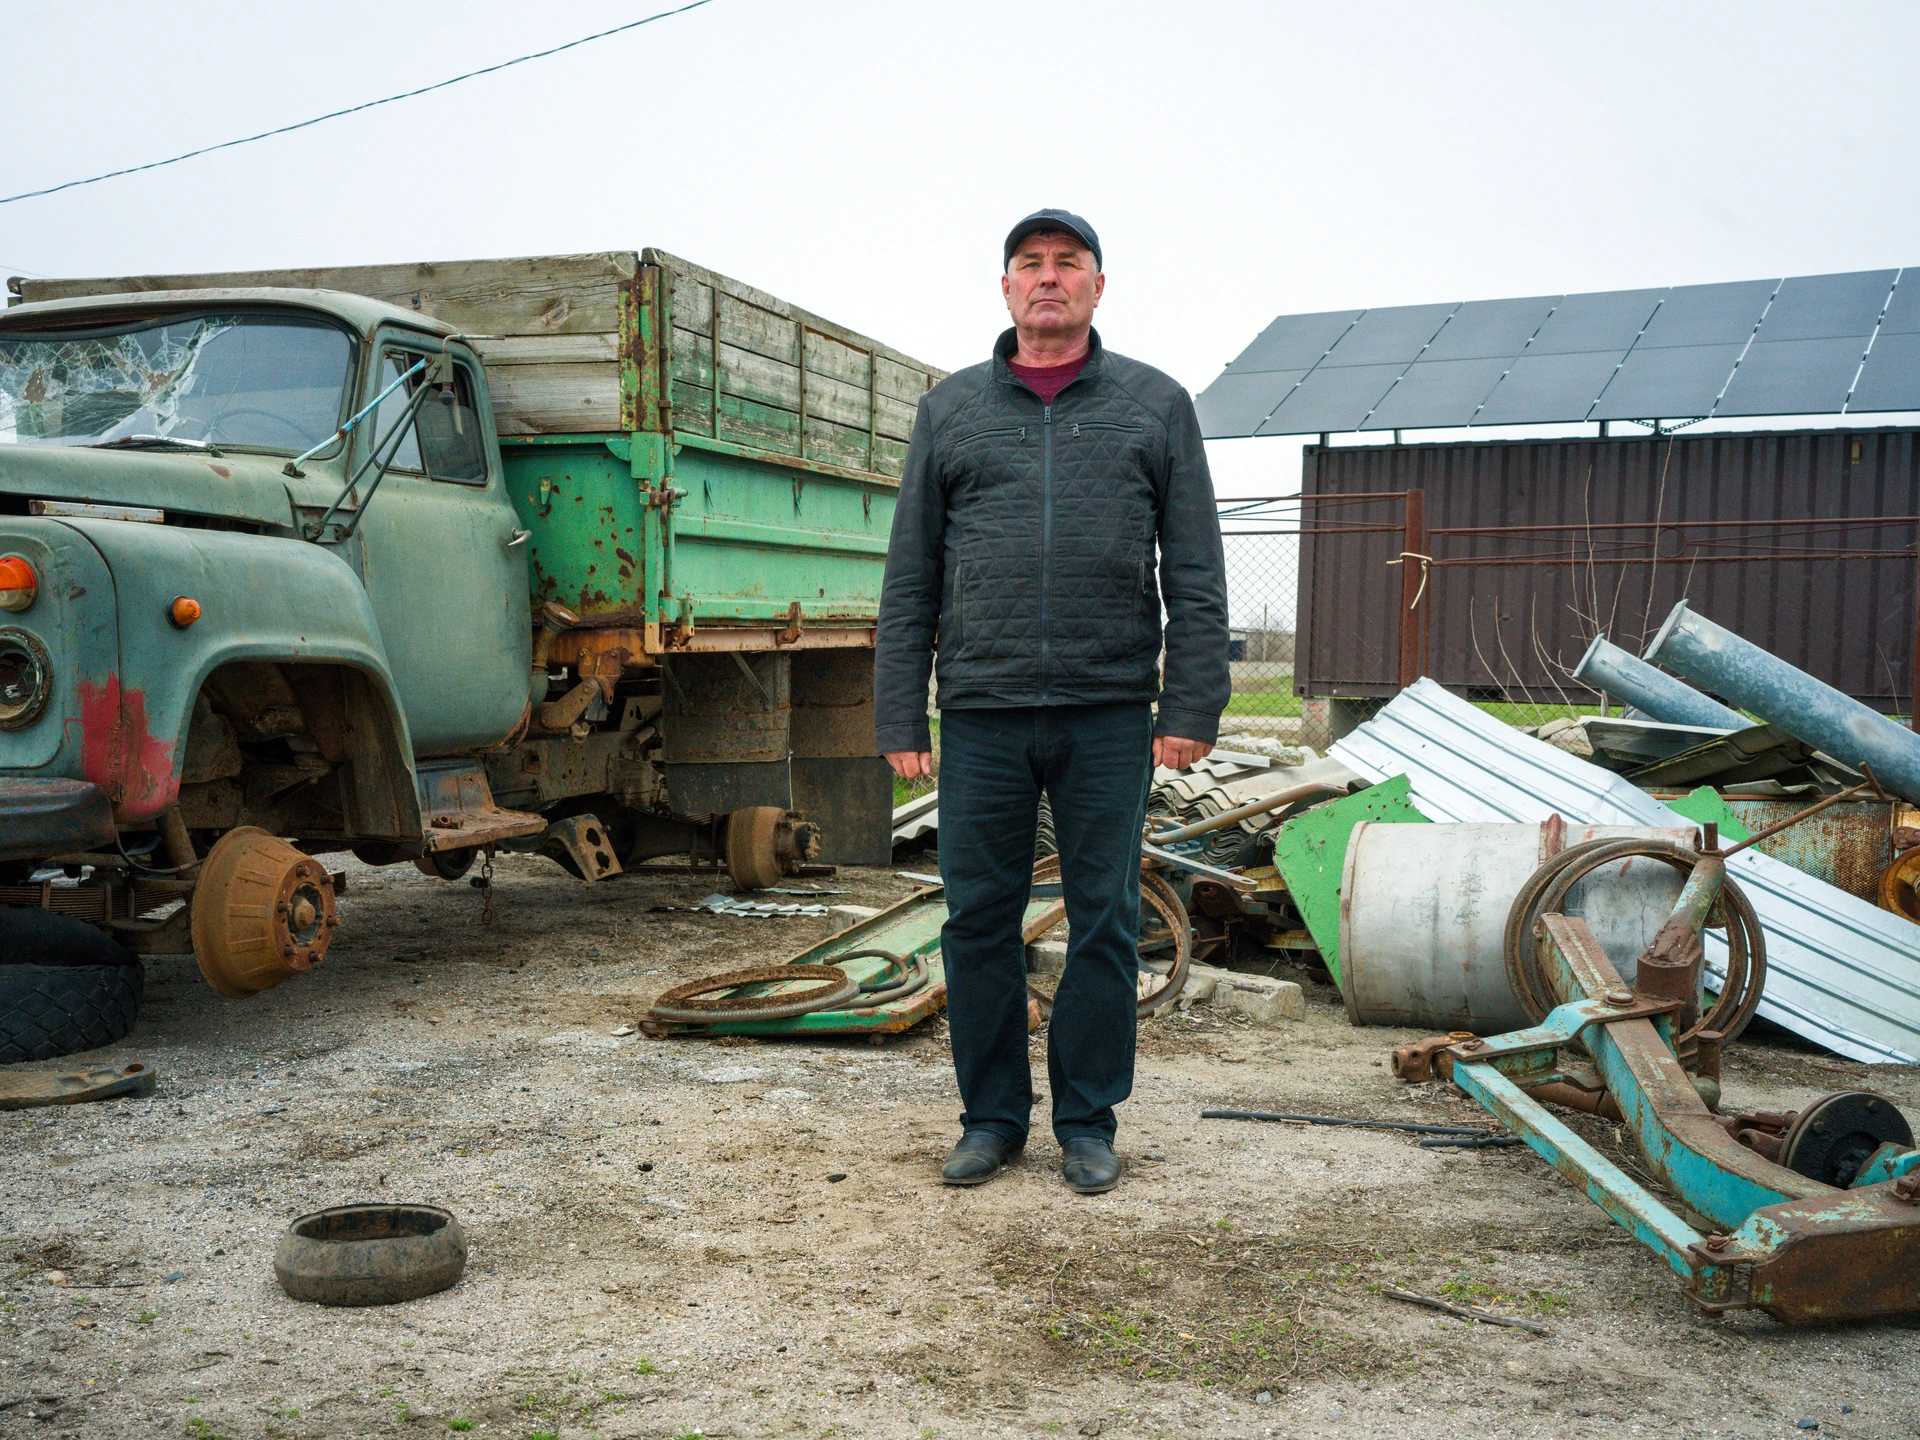 A middle-aged man stands looking at the camera. Behind him on the right, there's a green broken-down truck with both wheels missing on one side, revealing rusty axles. The windscreen is shattered and the front left headlight has been smashed off. To his left, rusty scrap pieces of metal and a metal barrel are scattered on the ground in an untidy pile, and behind them is a shelter with solar panels on its roof. The man is wearing a black jacket and cap, stands alone, with his arms by his side, and stares with pressed lips and a fixed look, squinting his eyes at the camera. He is Serhii Tsvetkov, a 58-year-old farmer from the village of Kalynivka, in Mykolaiv Oblast in the south of Ukraine.